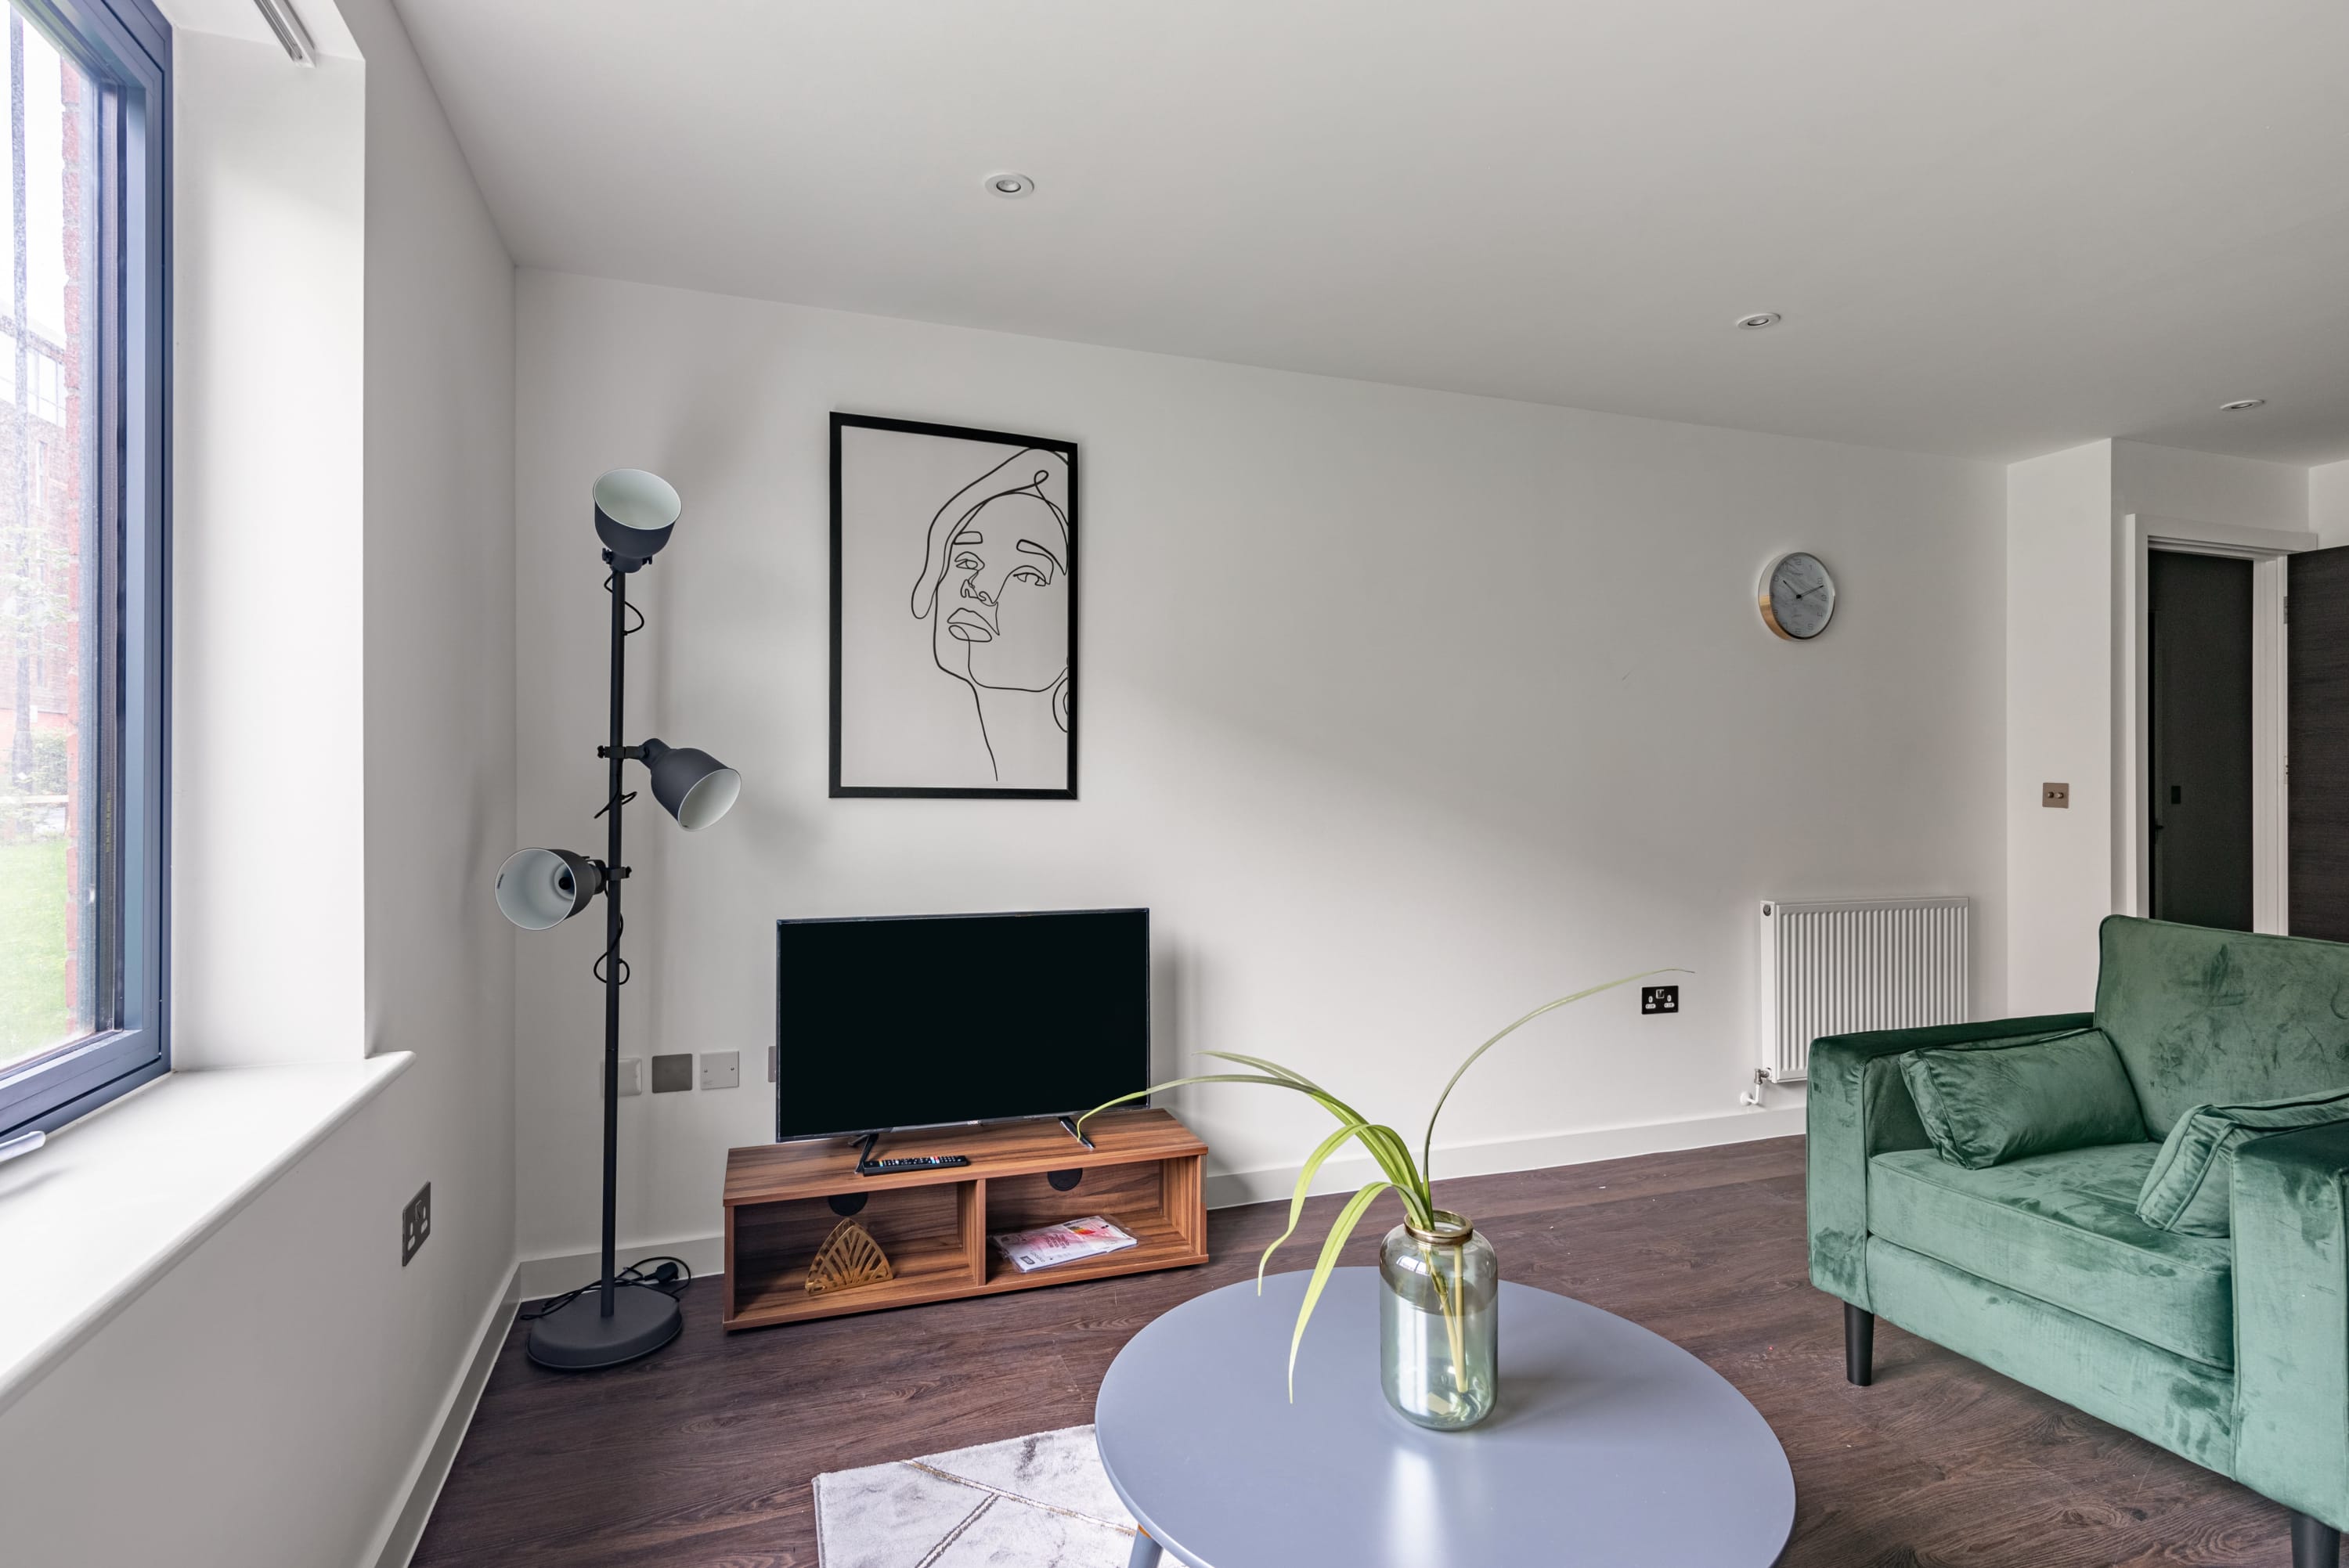 Property Image 2 - Amazing 2 bed apartment in York’s city centre